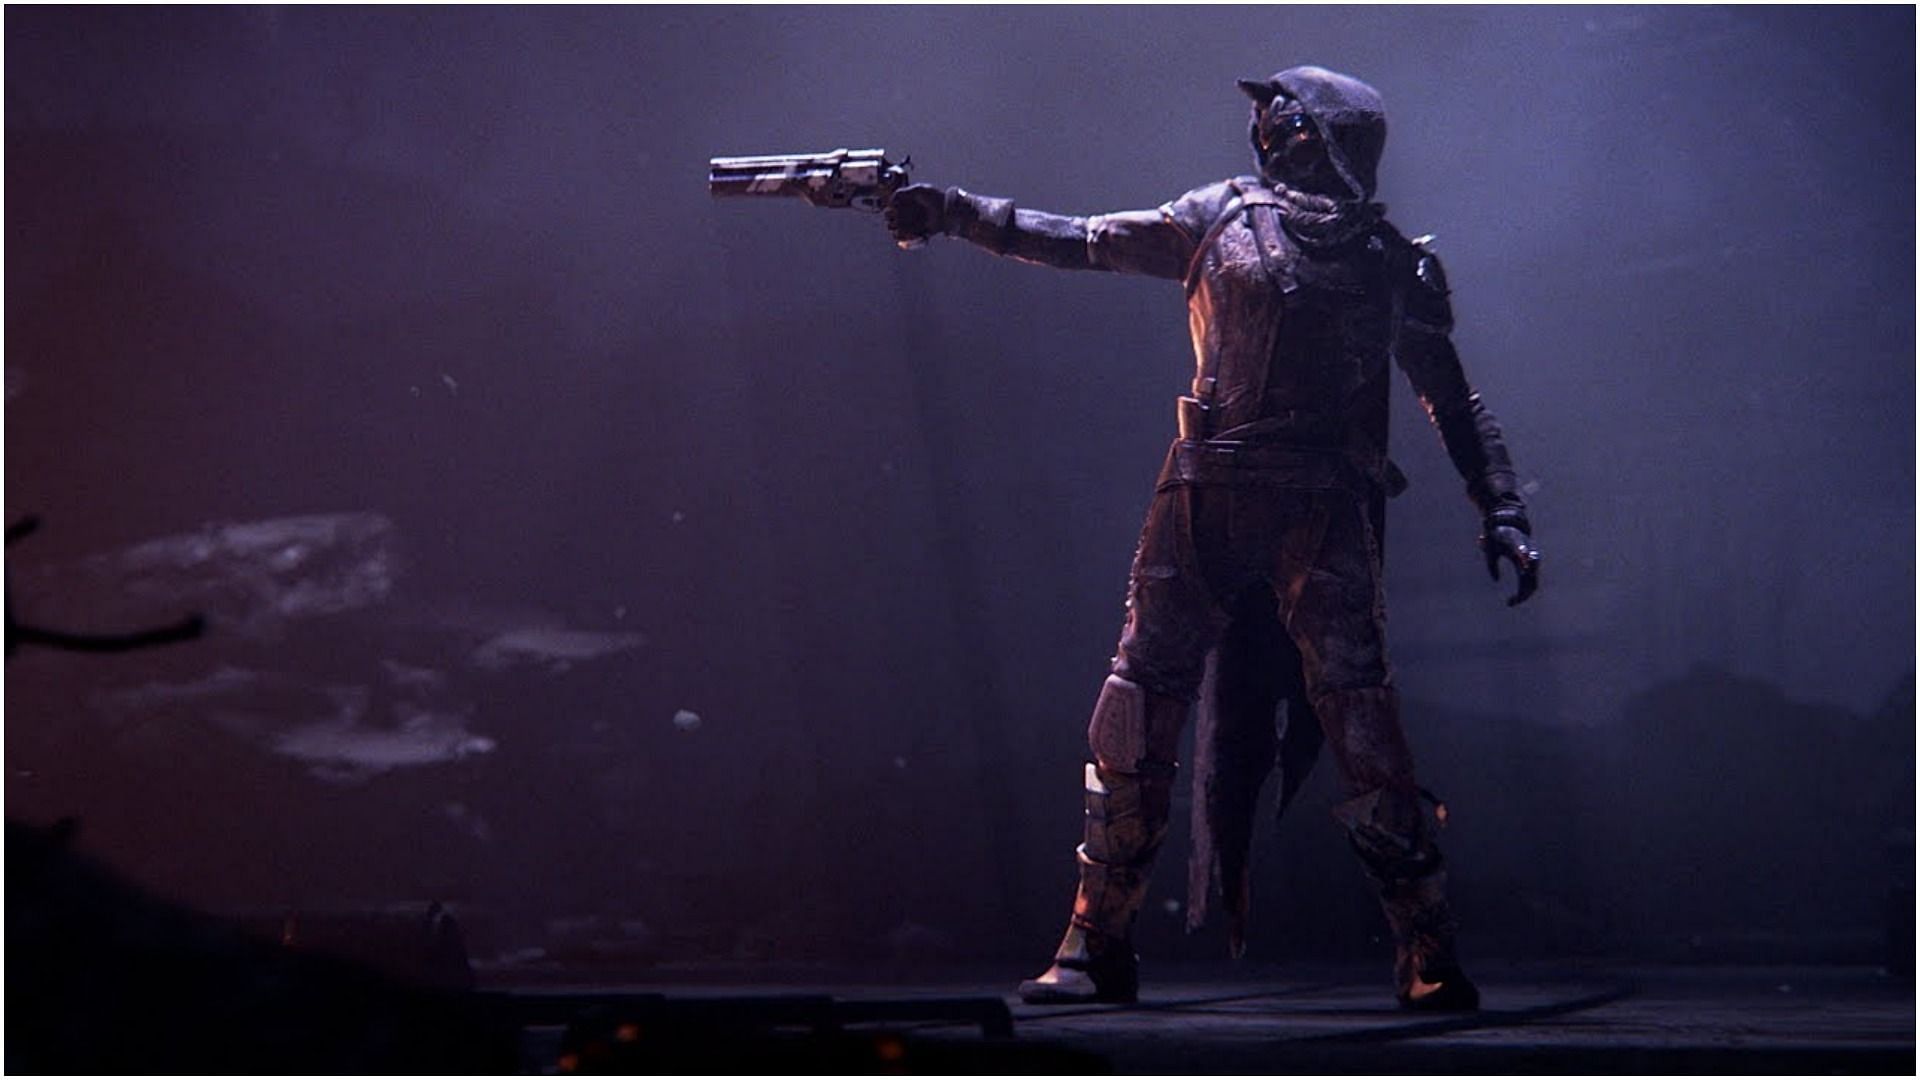 Cayde-6 holding the Ace of Spades (Image via Bungie)